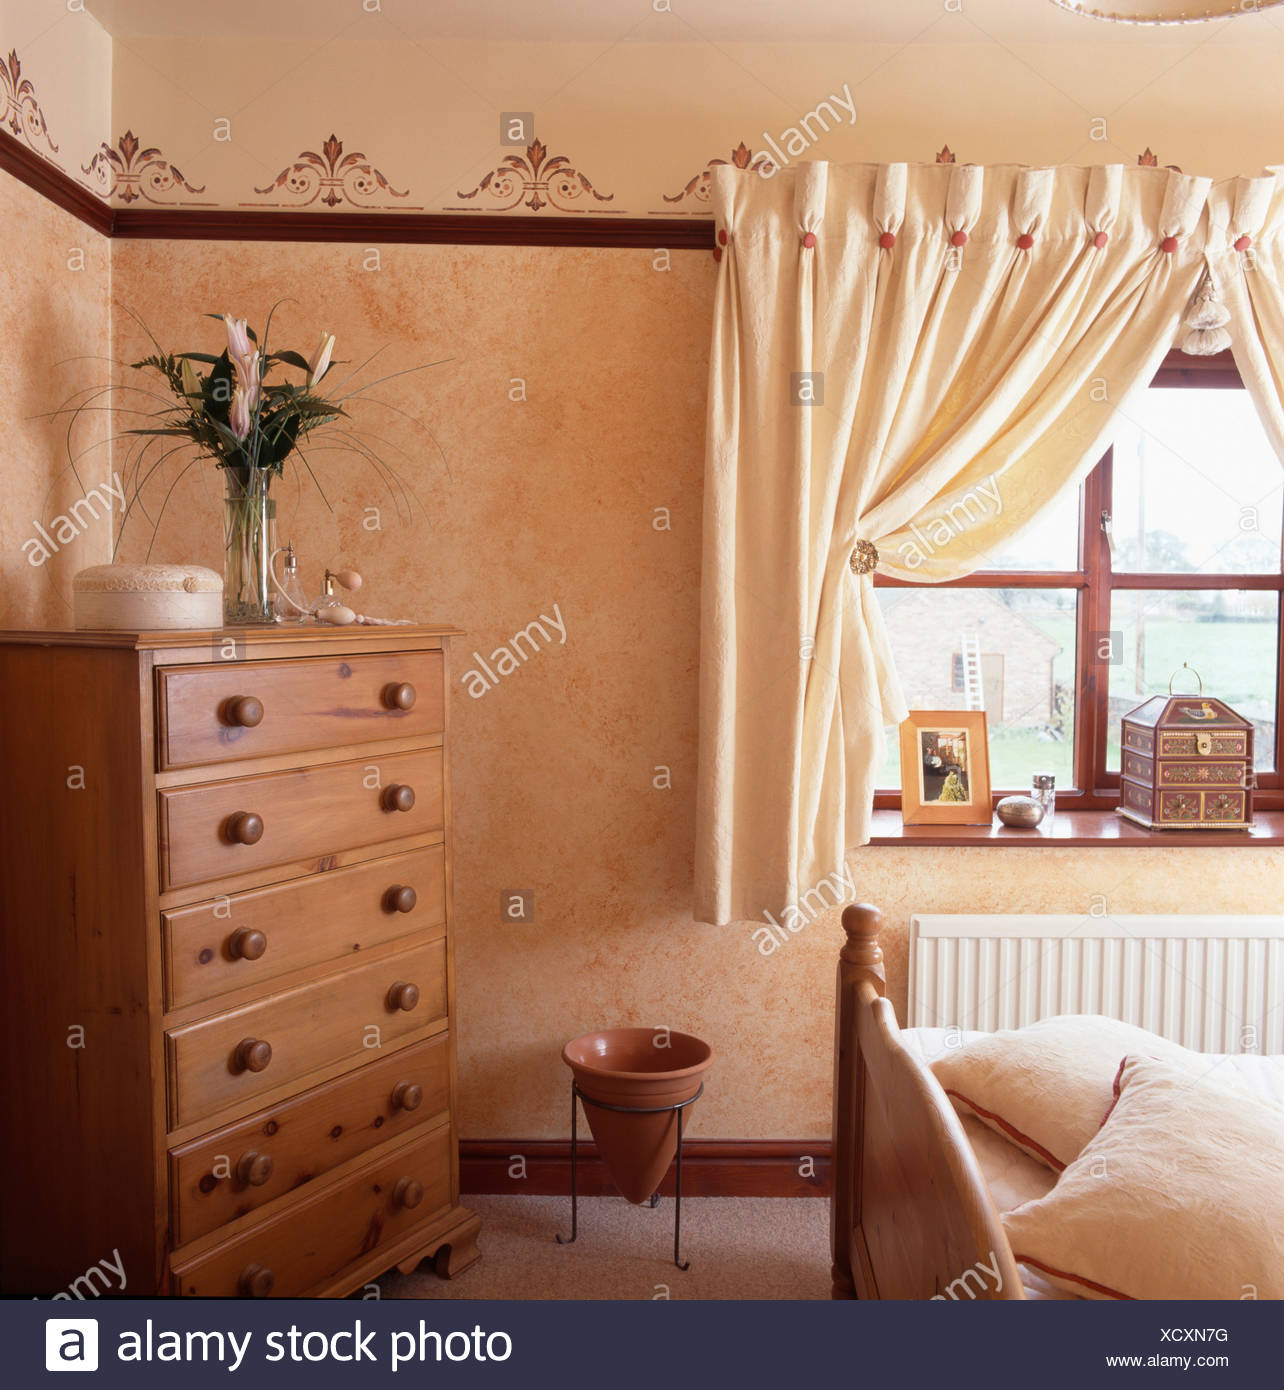 Chest Of Drawers In Corner Of Small Bedroom With Cream Curtains At